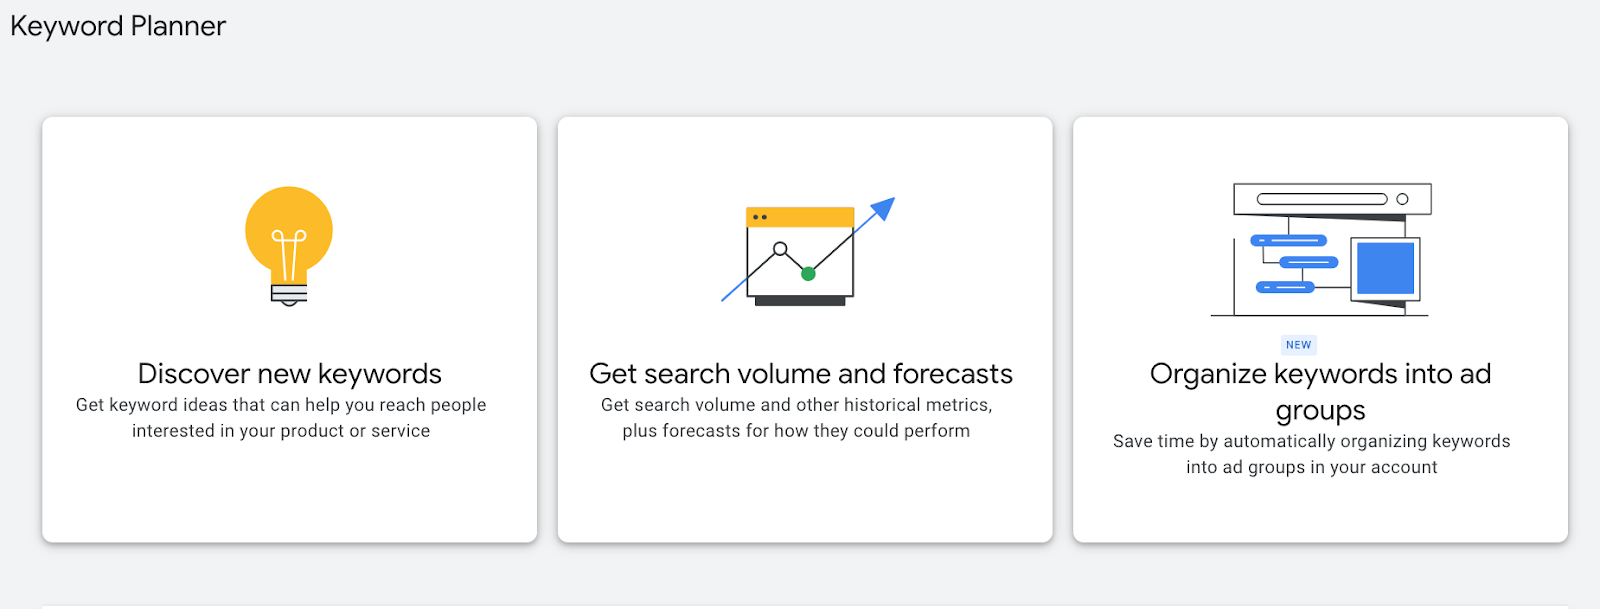 Google ads - "Get search volume and forecasts"